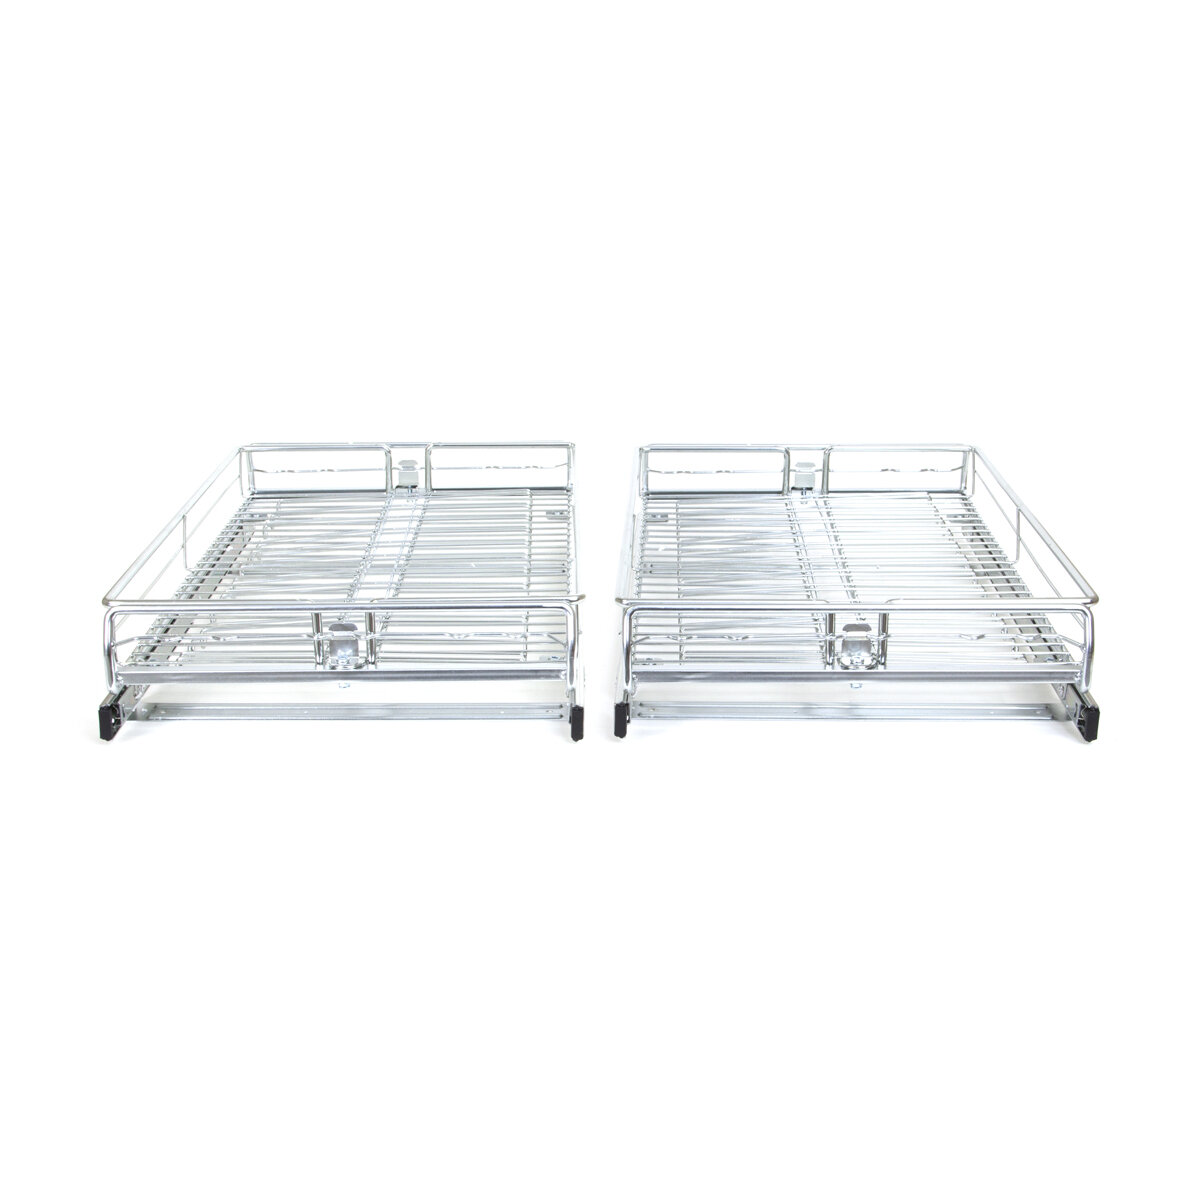 2Pack Expandable Pull Out Drawers for Kitchen Cabinets, Heavy Duty